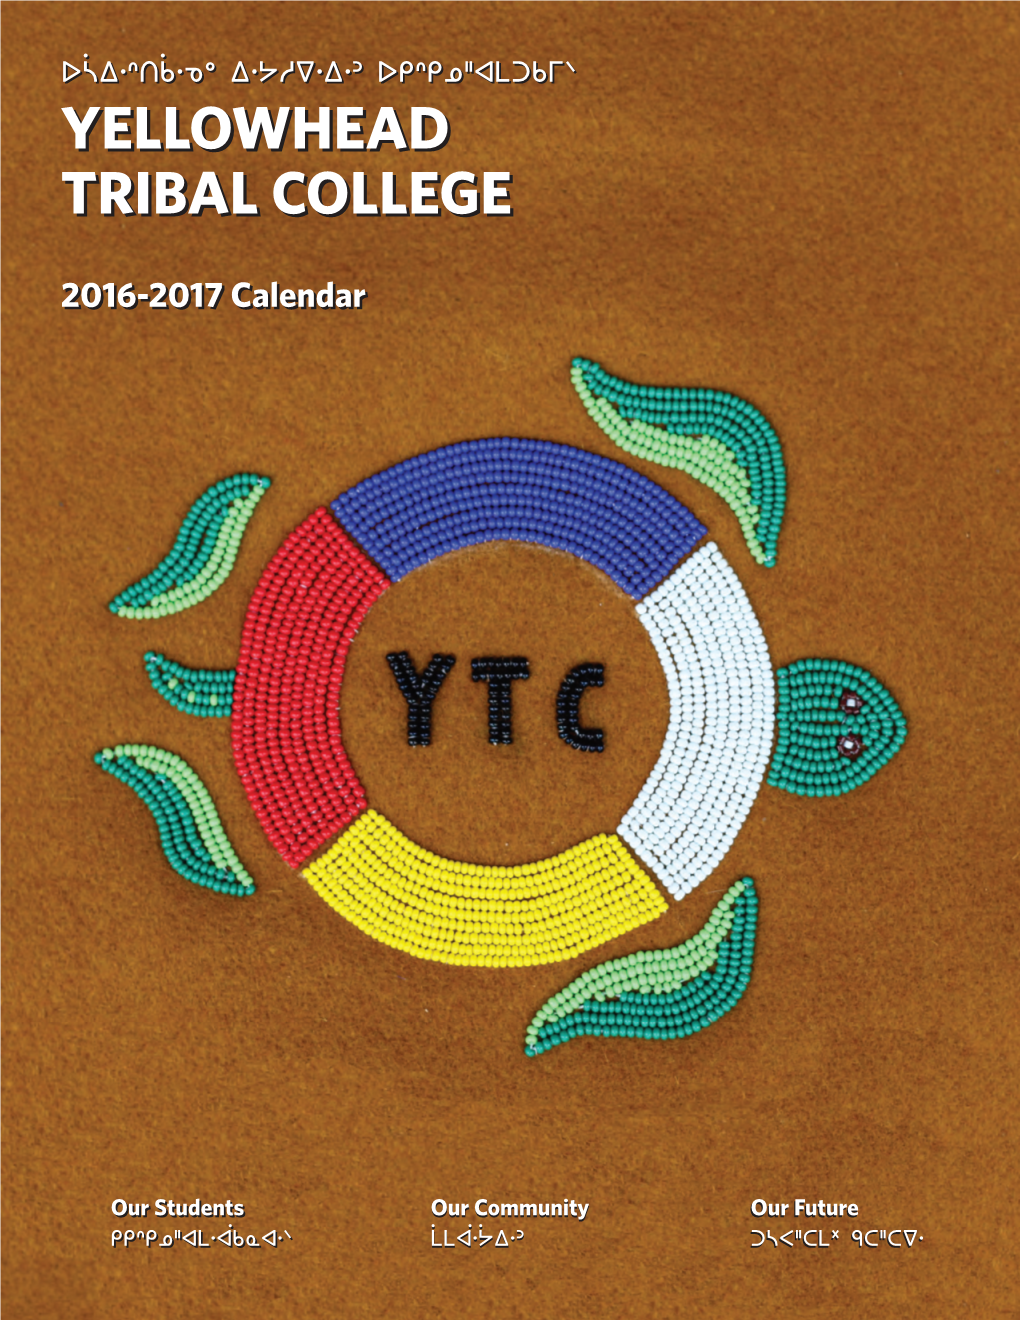 YELLOWHEAD TRIBAL COLLEGE Cover Beadwork by Mary Migwi “There Is a Longing in the Heart of My People to Reach out and Grasp That Which Is Needed for Our Survival